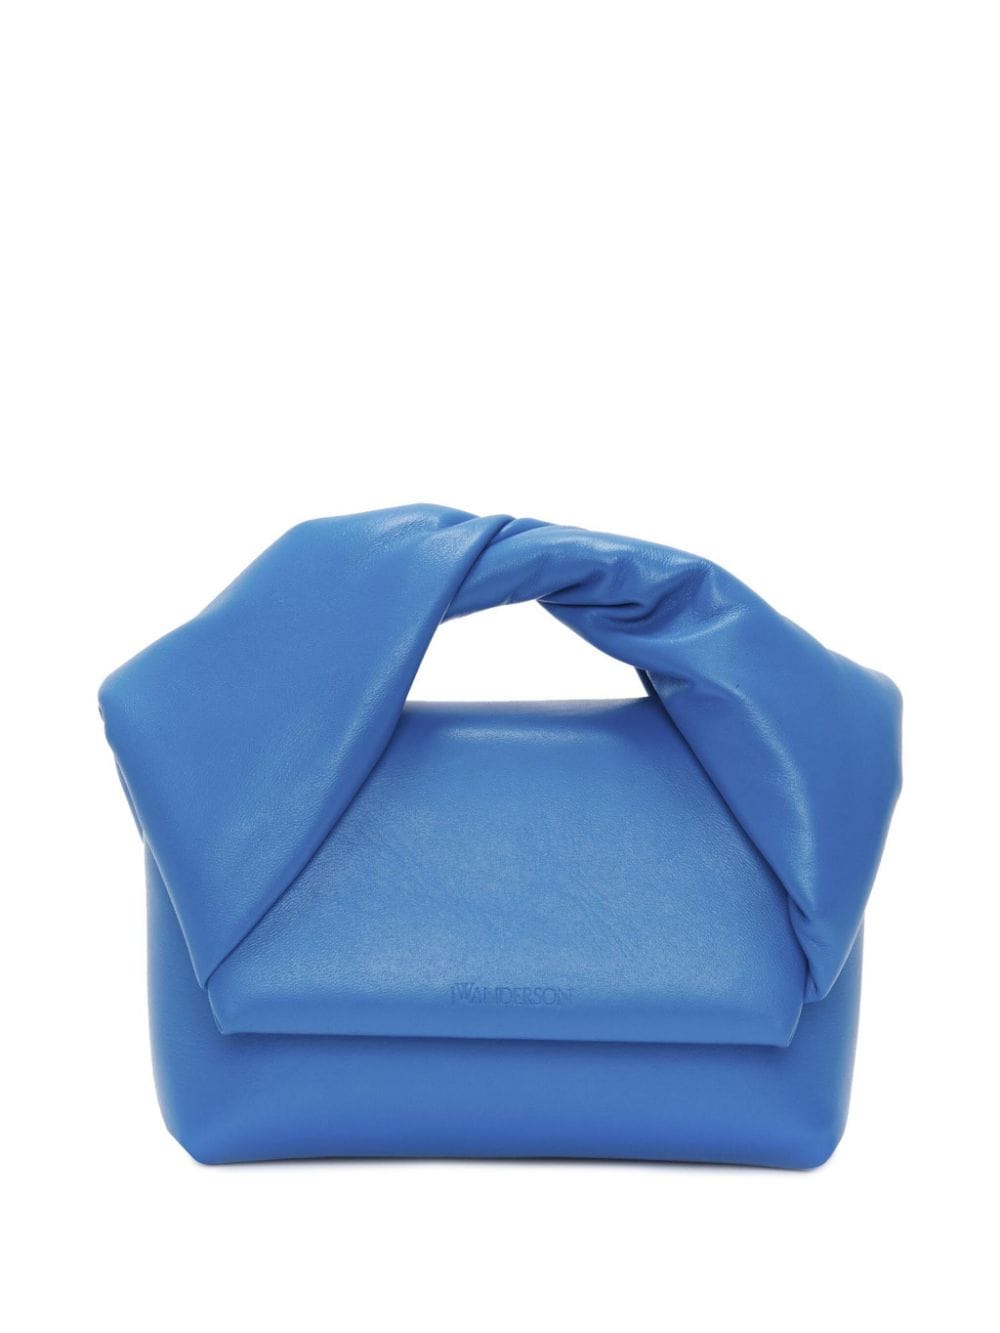 JW Anderson small Twister leather tote bag - Blue